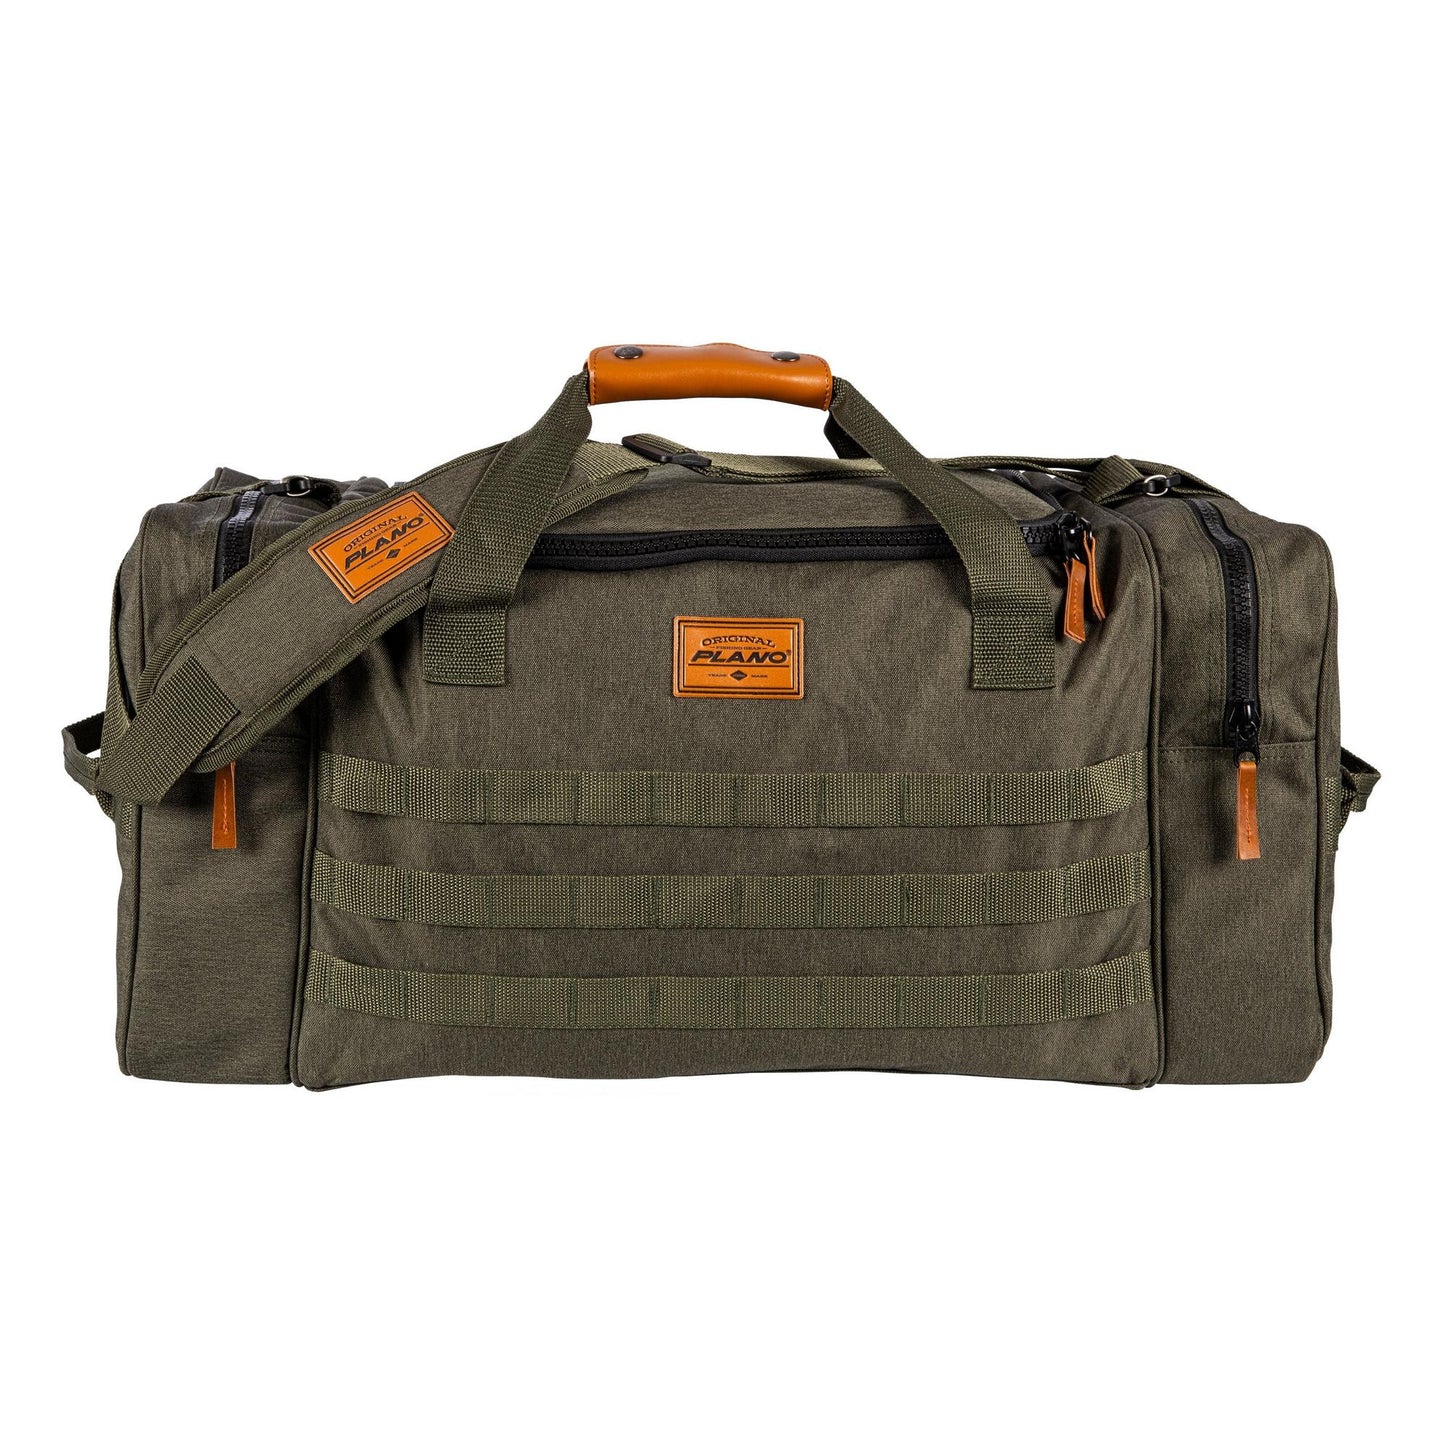 Plano Series A Tackle Duffle